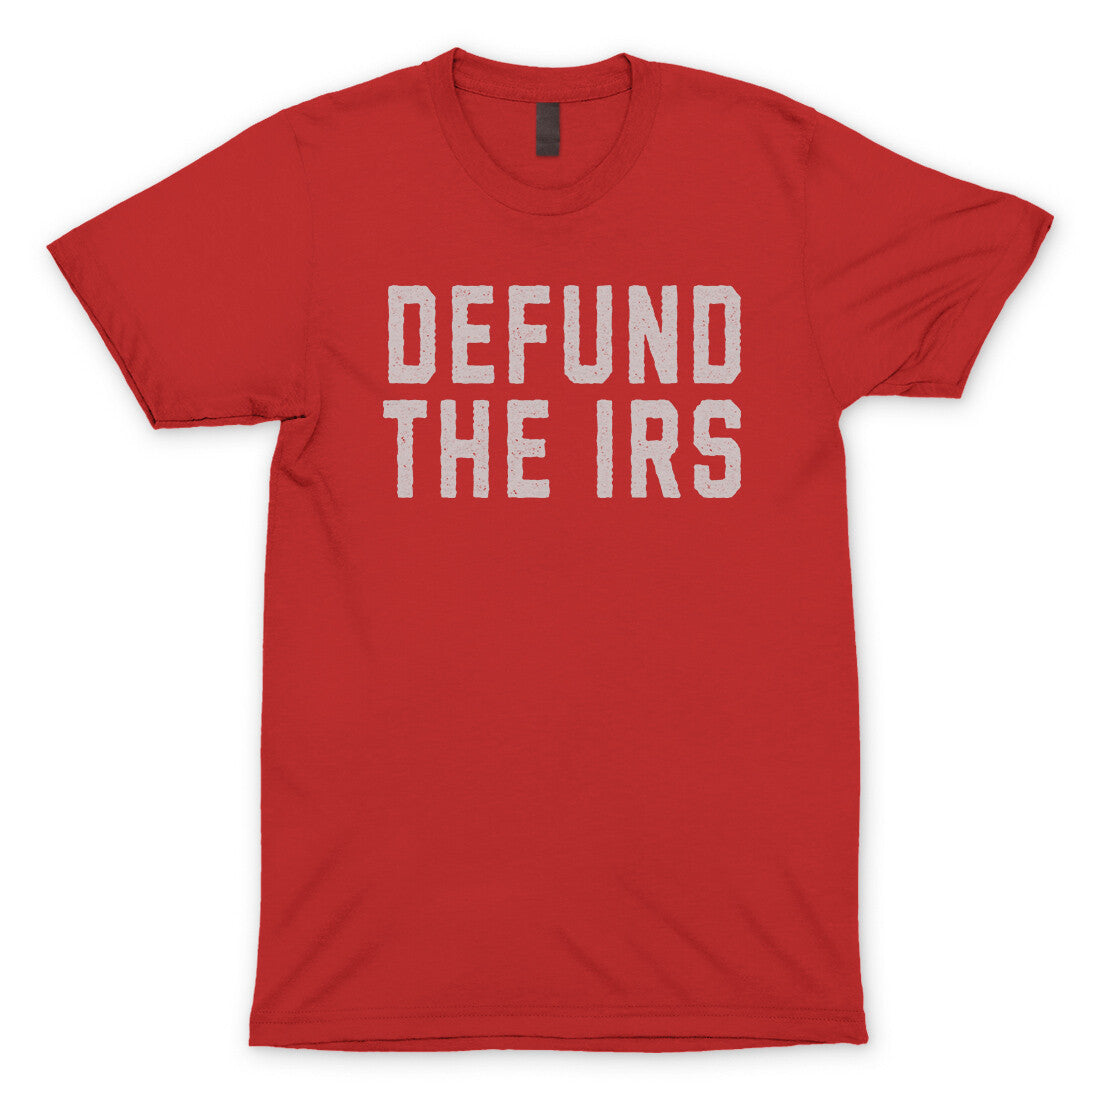 Defund the IRS in Red Color